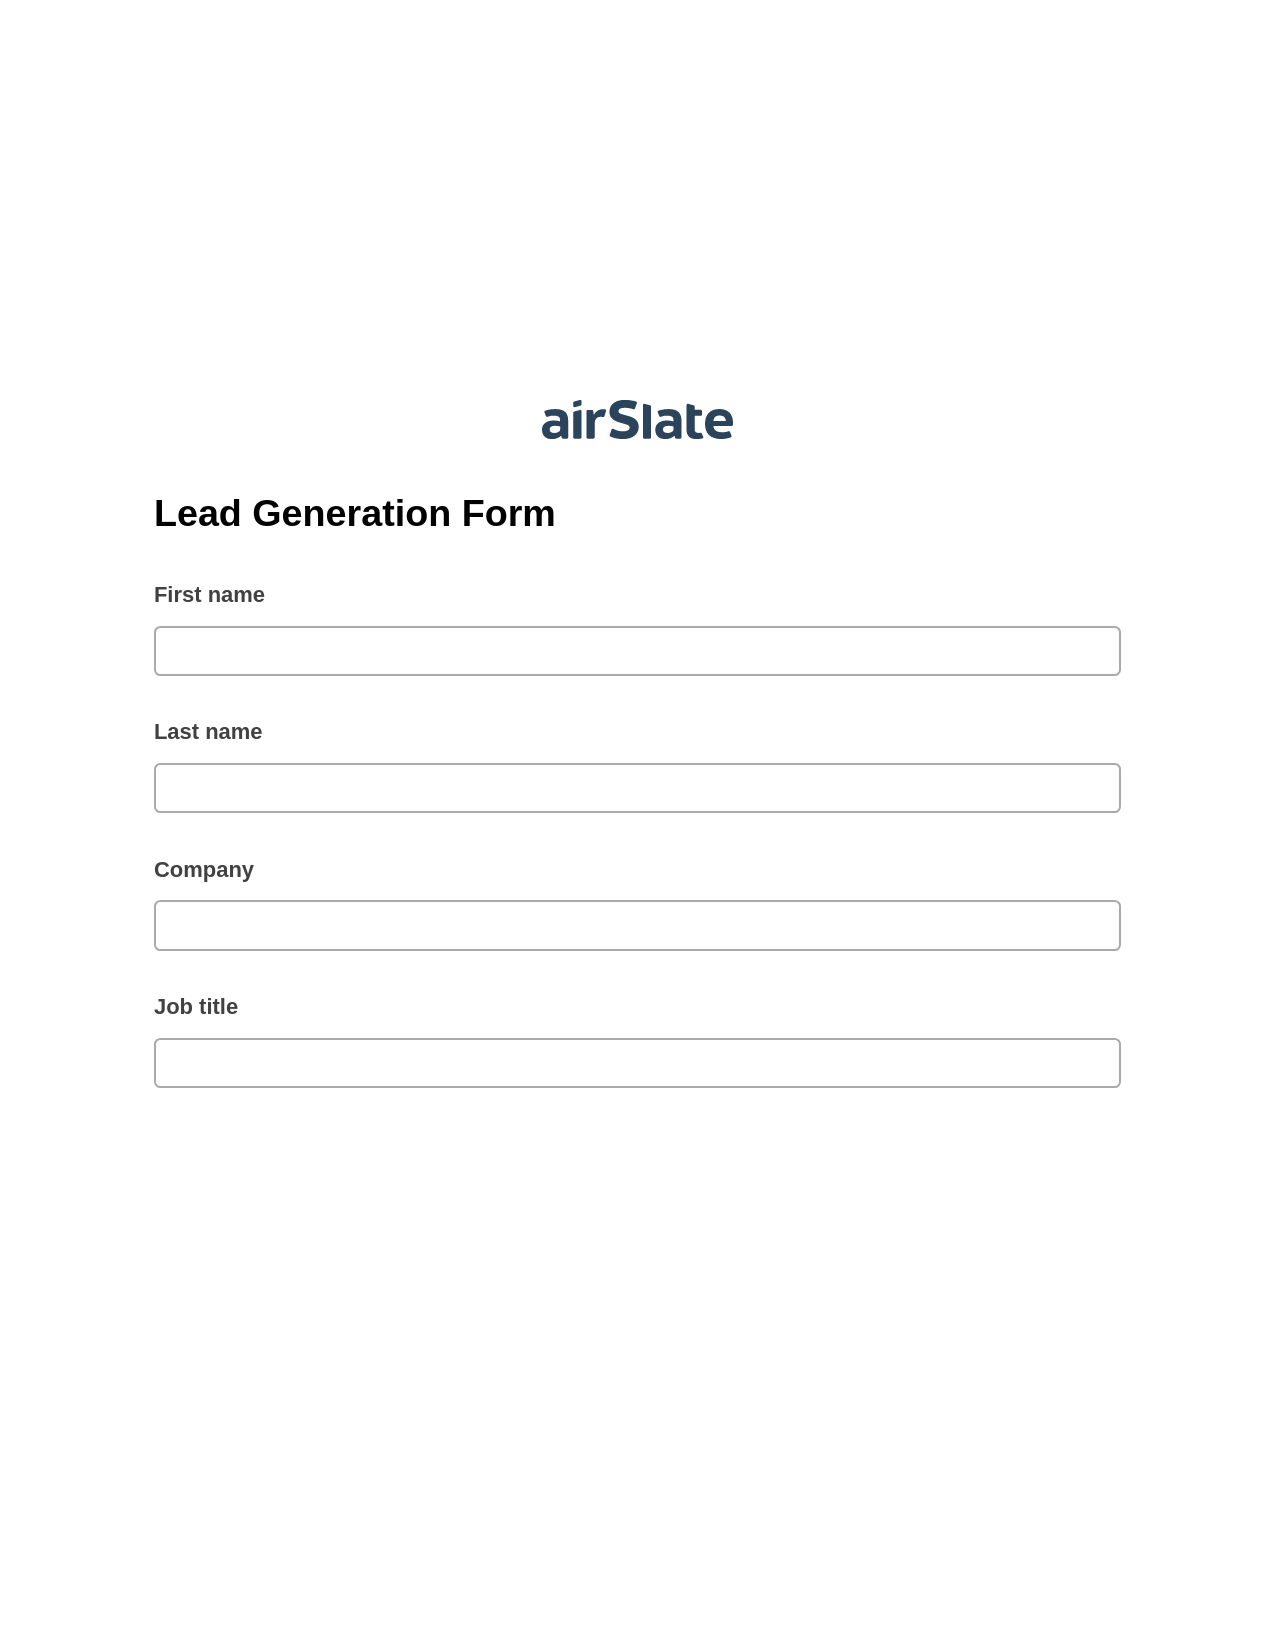 Lead Generation Form Pre-fill Dropdowns from Airtable, Remove Tags From Slate Bot, Archive to Google Drive Bot